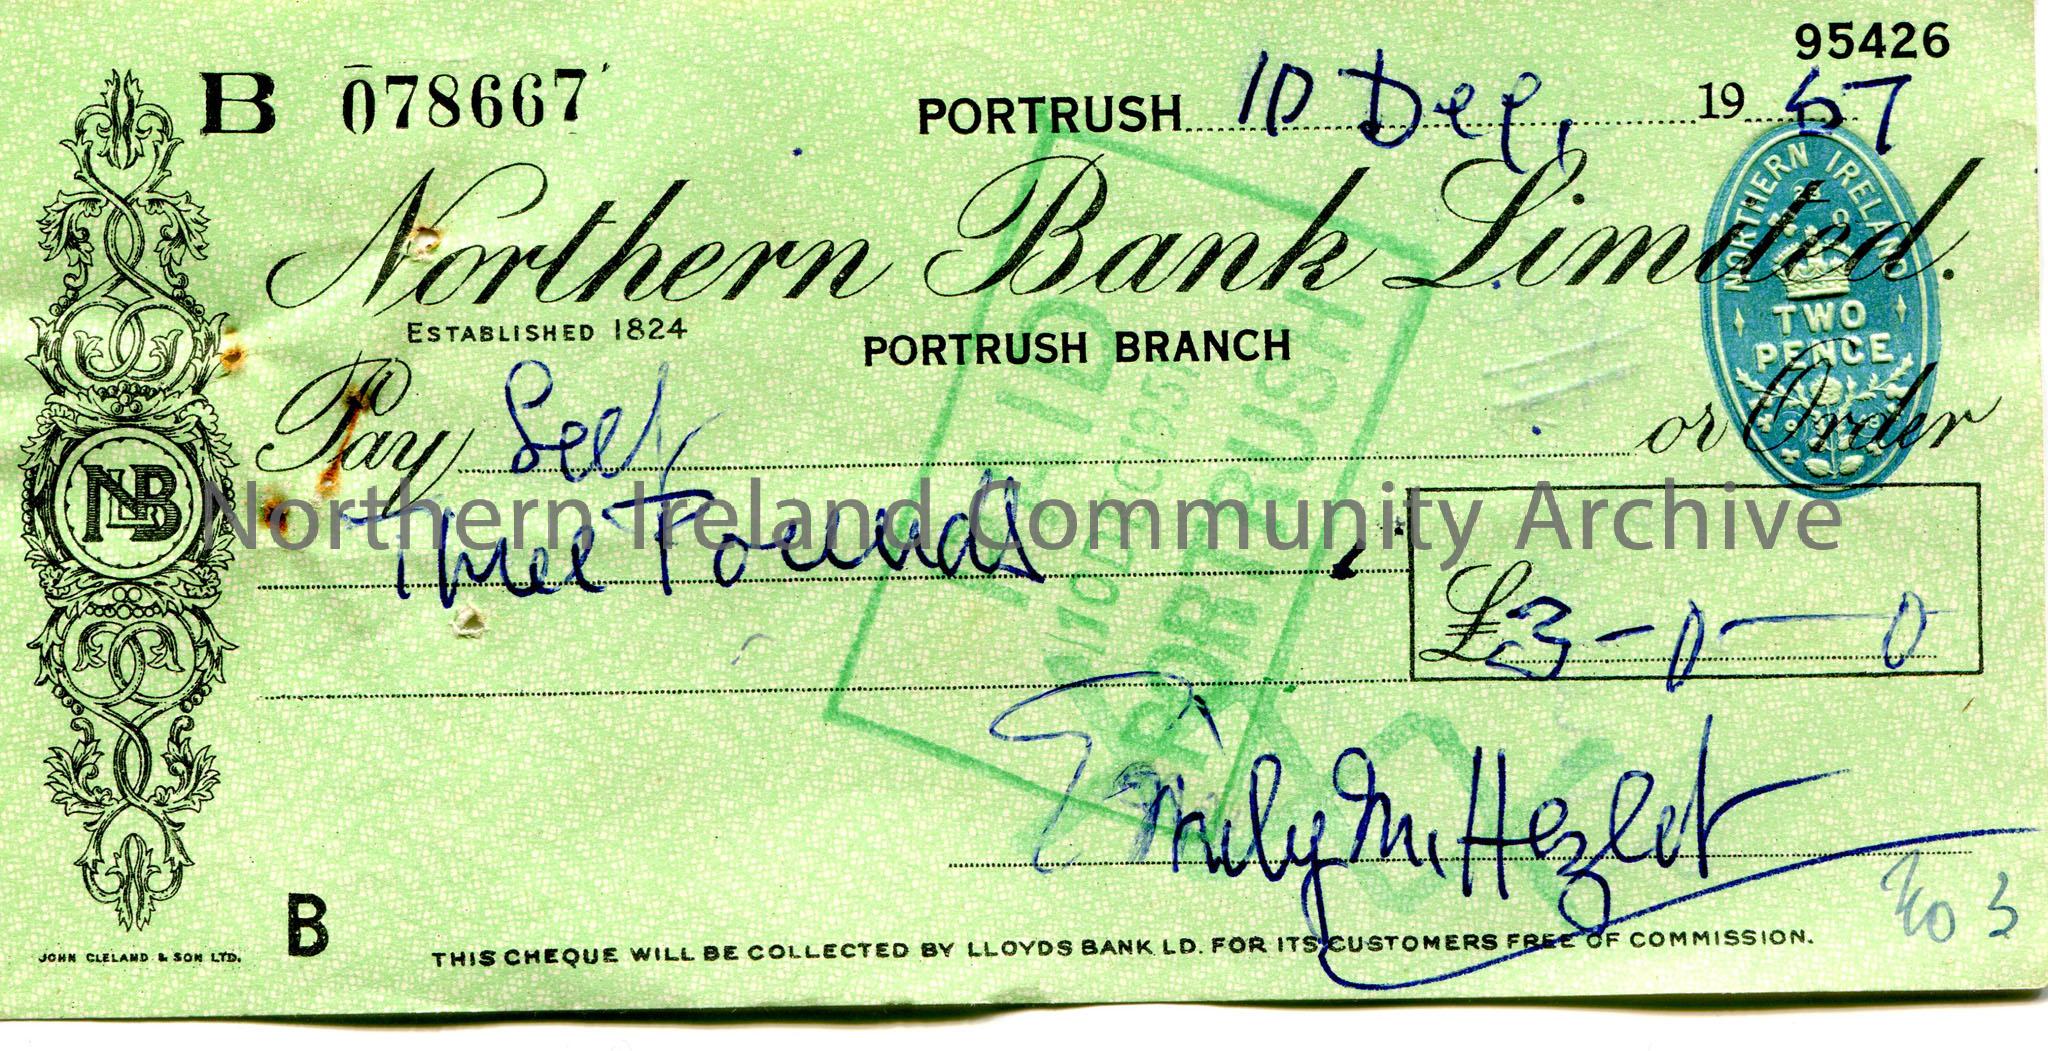 Handwritten Northern Bank Limited, Portrush branch cheque, no 078667. Payable to ‘Self’ from Emily M. Hezlet for £3.0.0. Dated 10th December, 195…